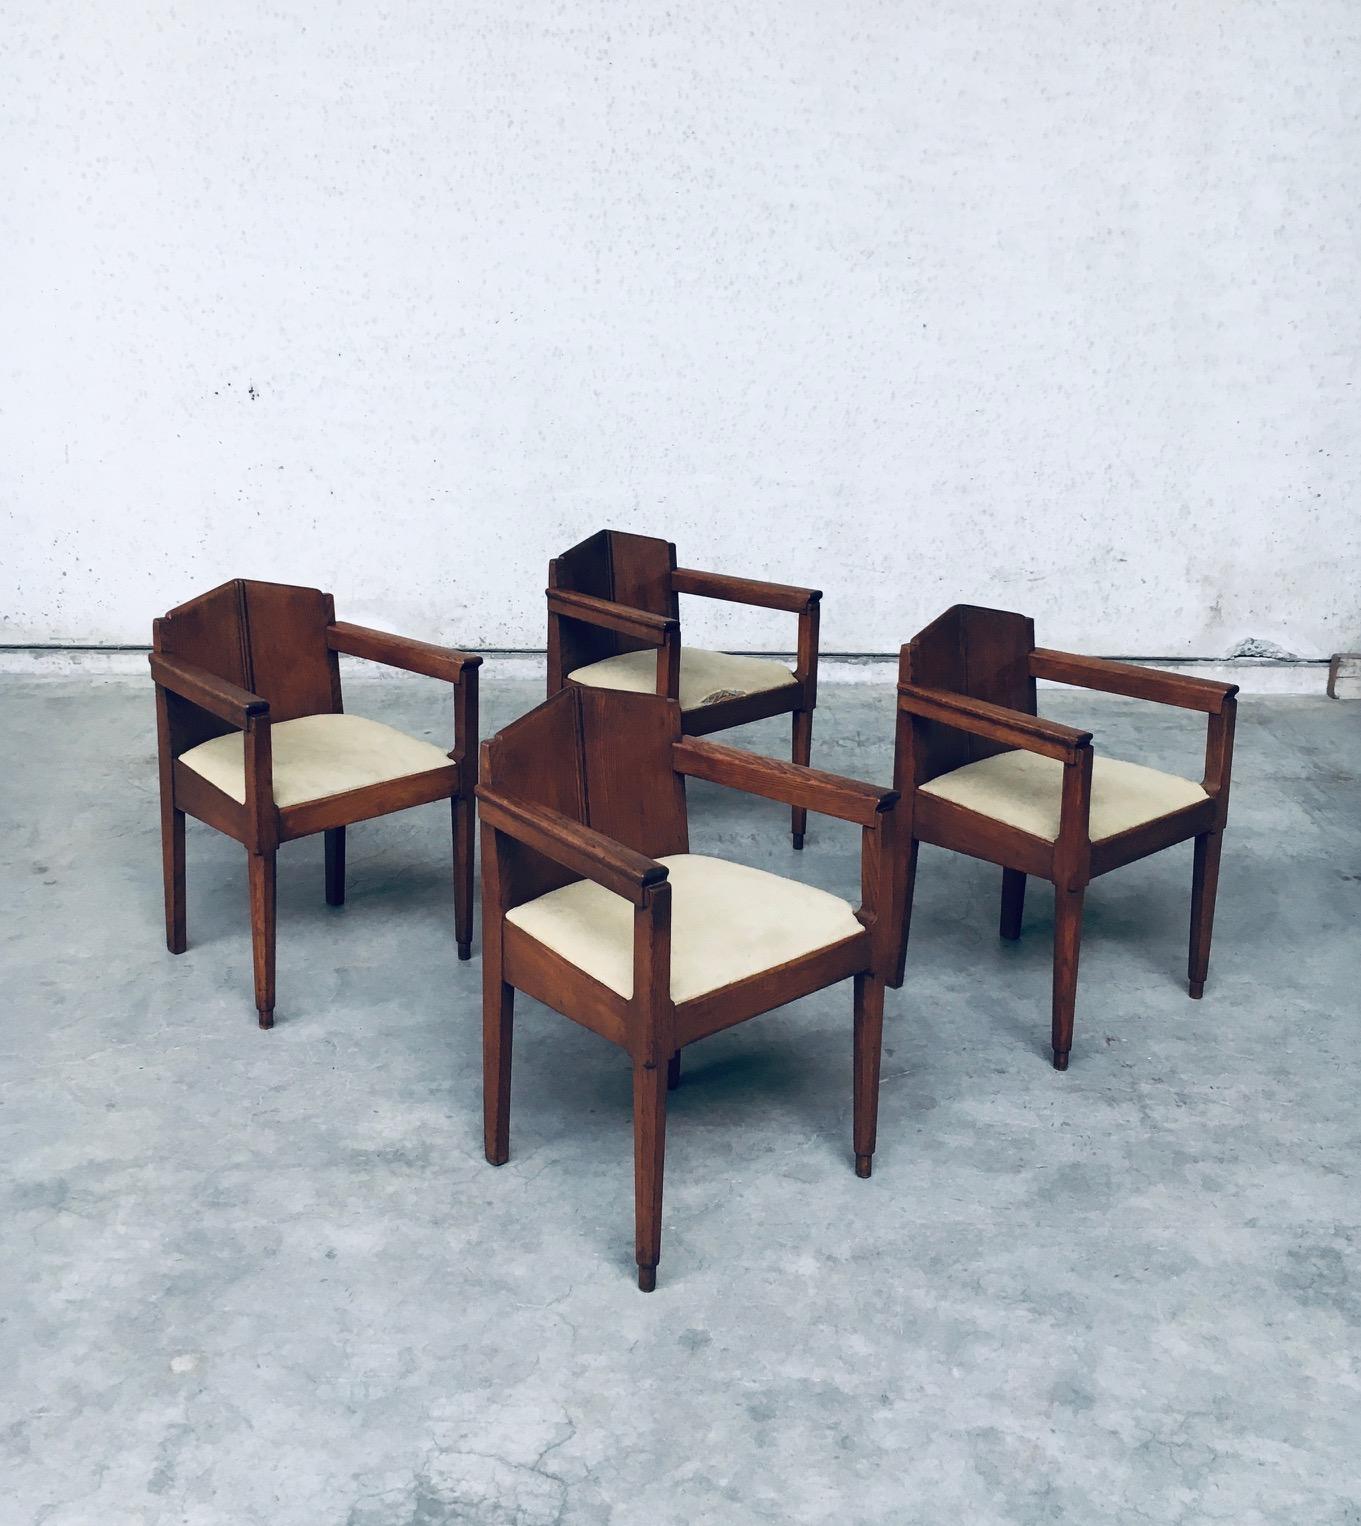 Vintage very Rare early Dutch Modernism Design Amsterdam School Dining Chair set of 4. Made in the Netherlands, Amsterdam, 1910 / 1920's period. Solid oak constrcuted chairs with fabric covered seats. Hand made oak wood arm chairs with wel thought